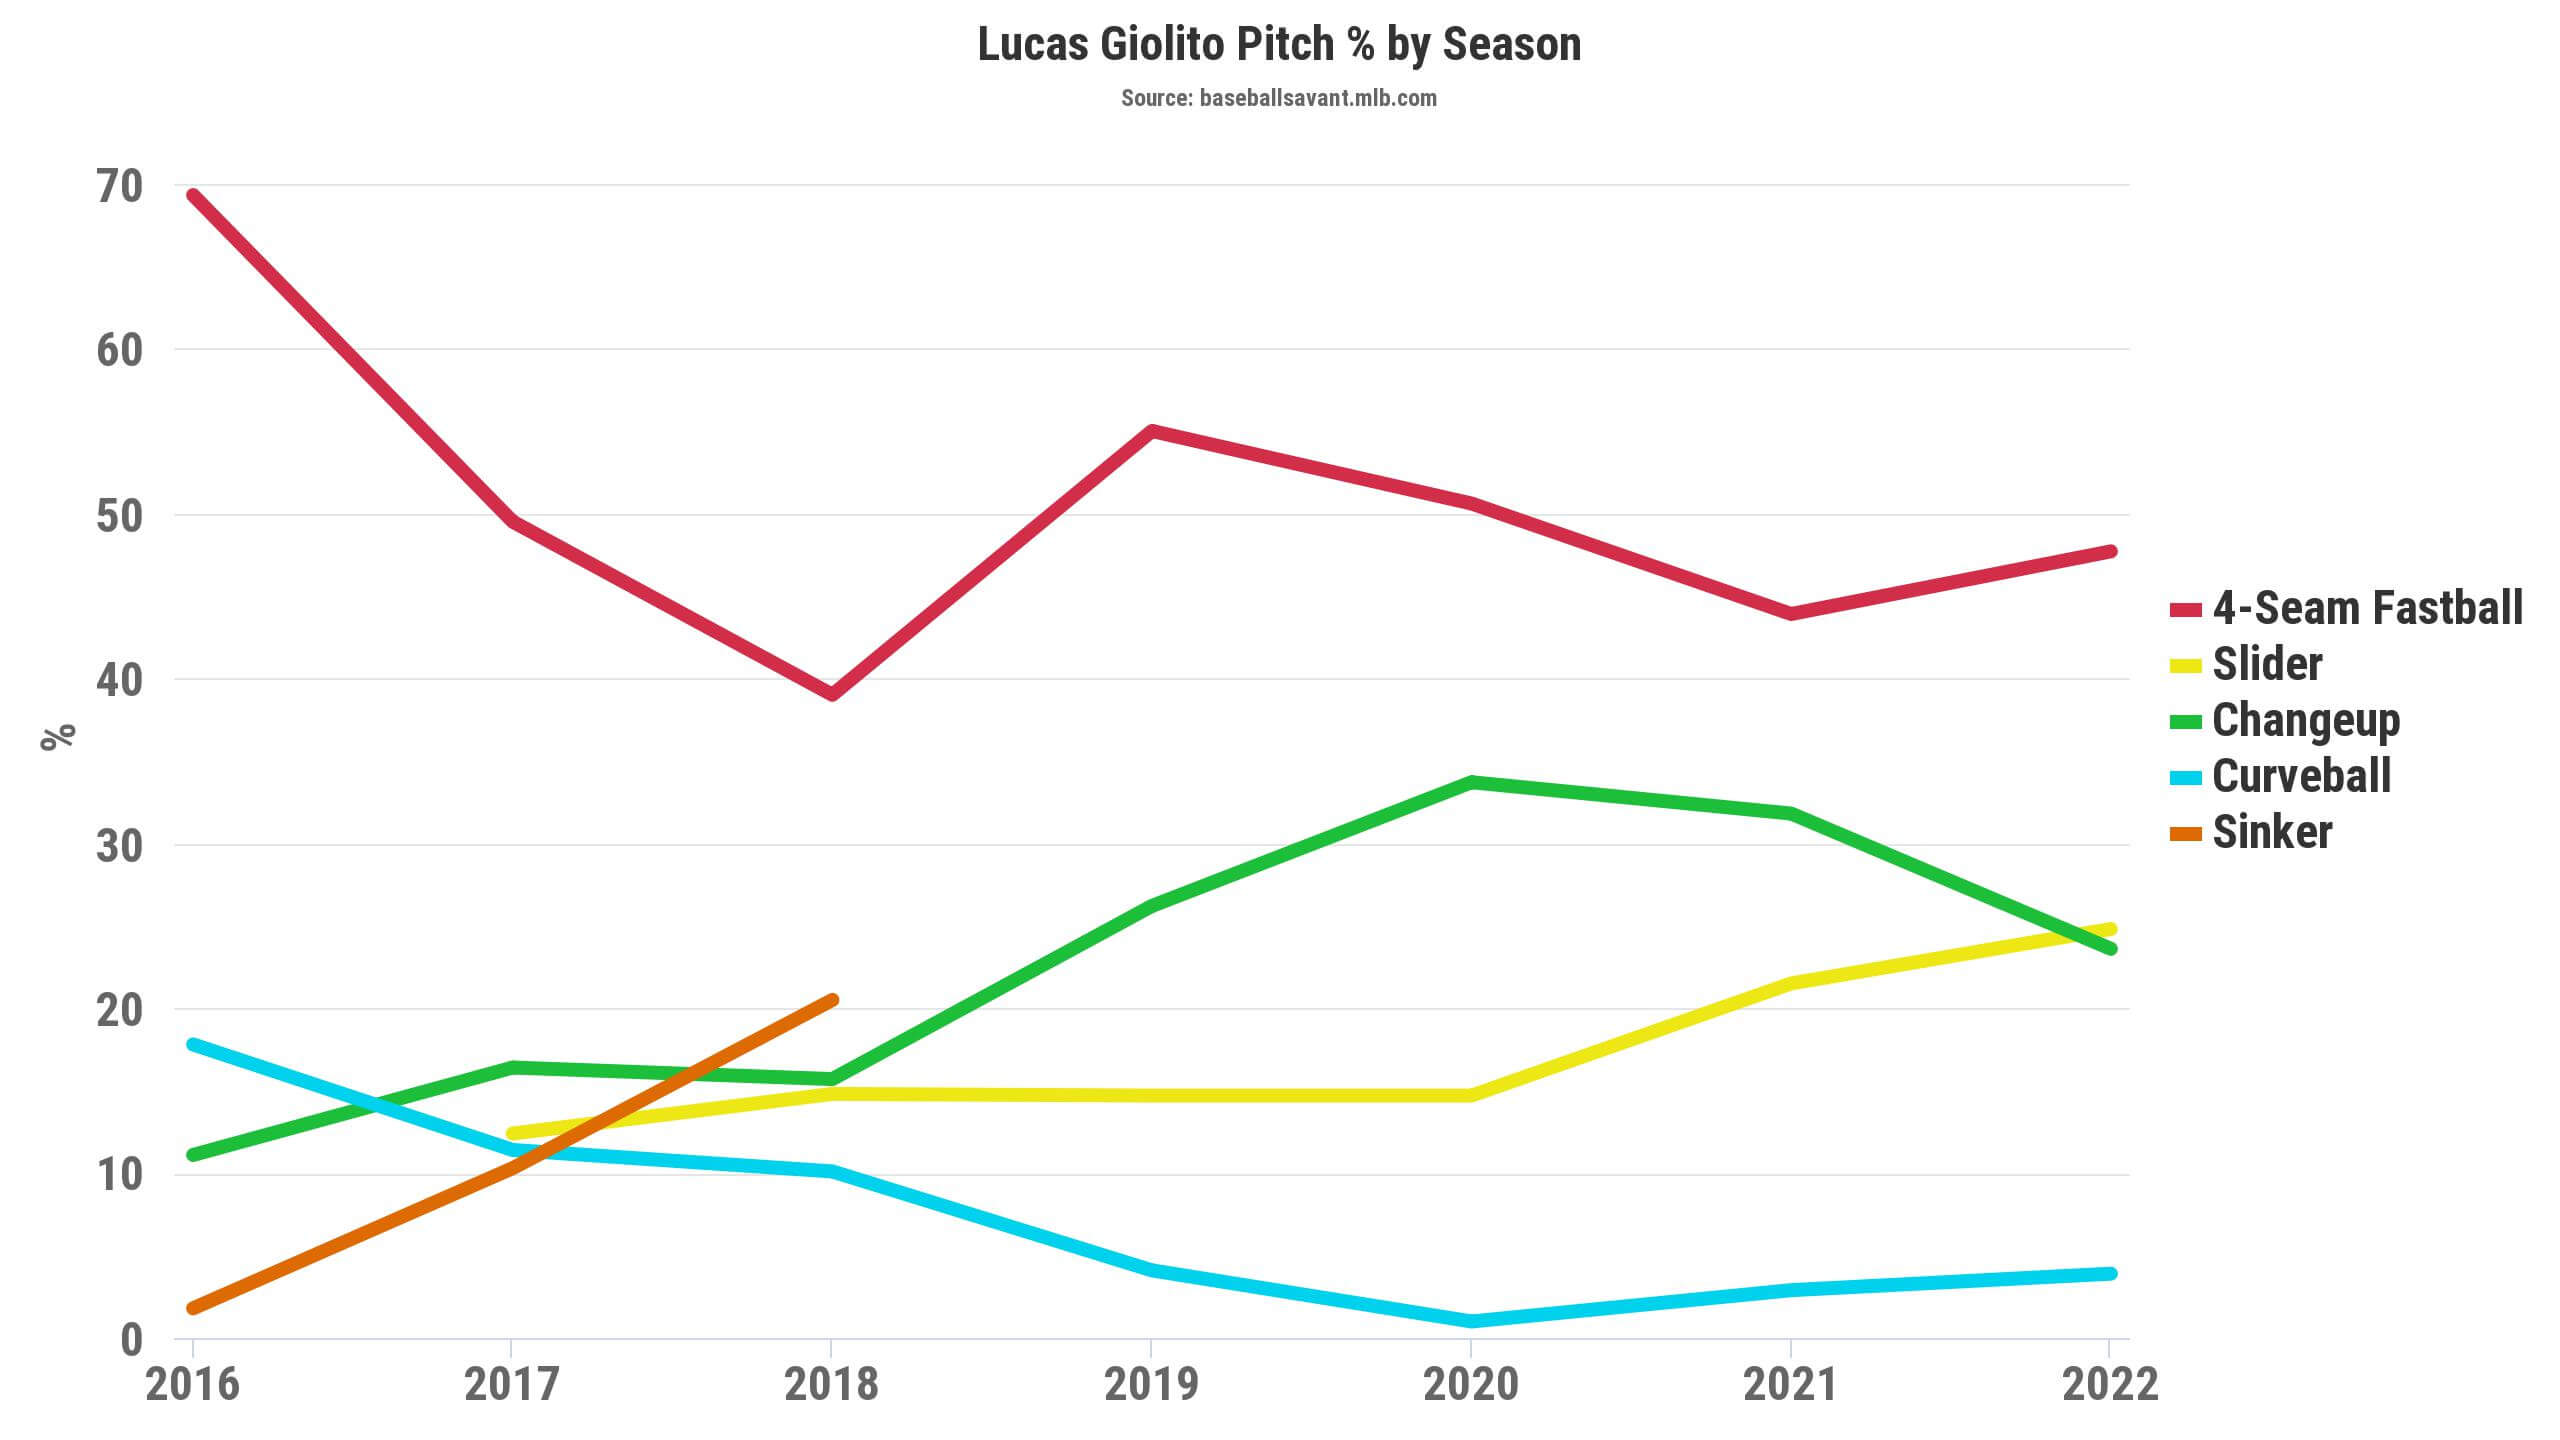 Fantasy owners shouldn't rush to sell Lucas Giolito